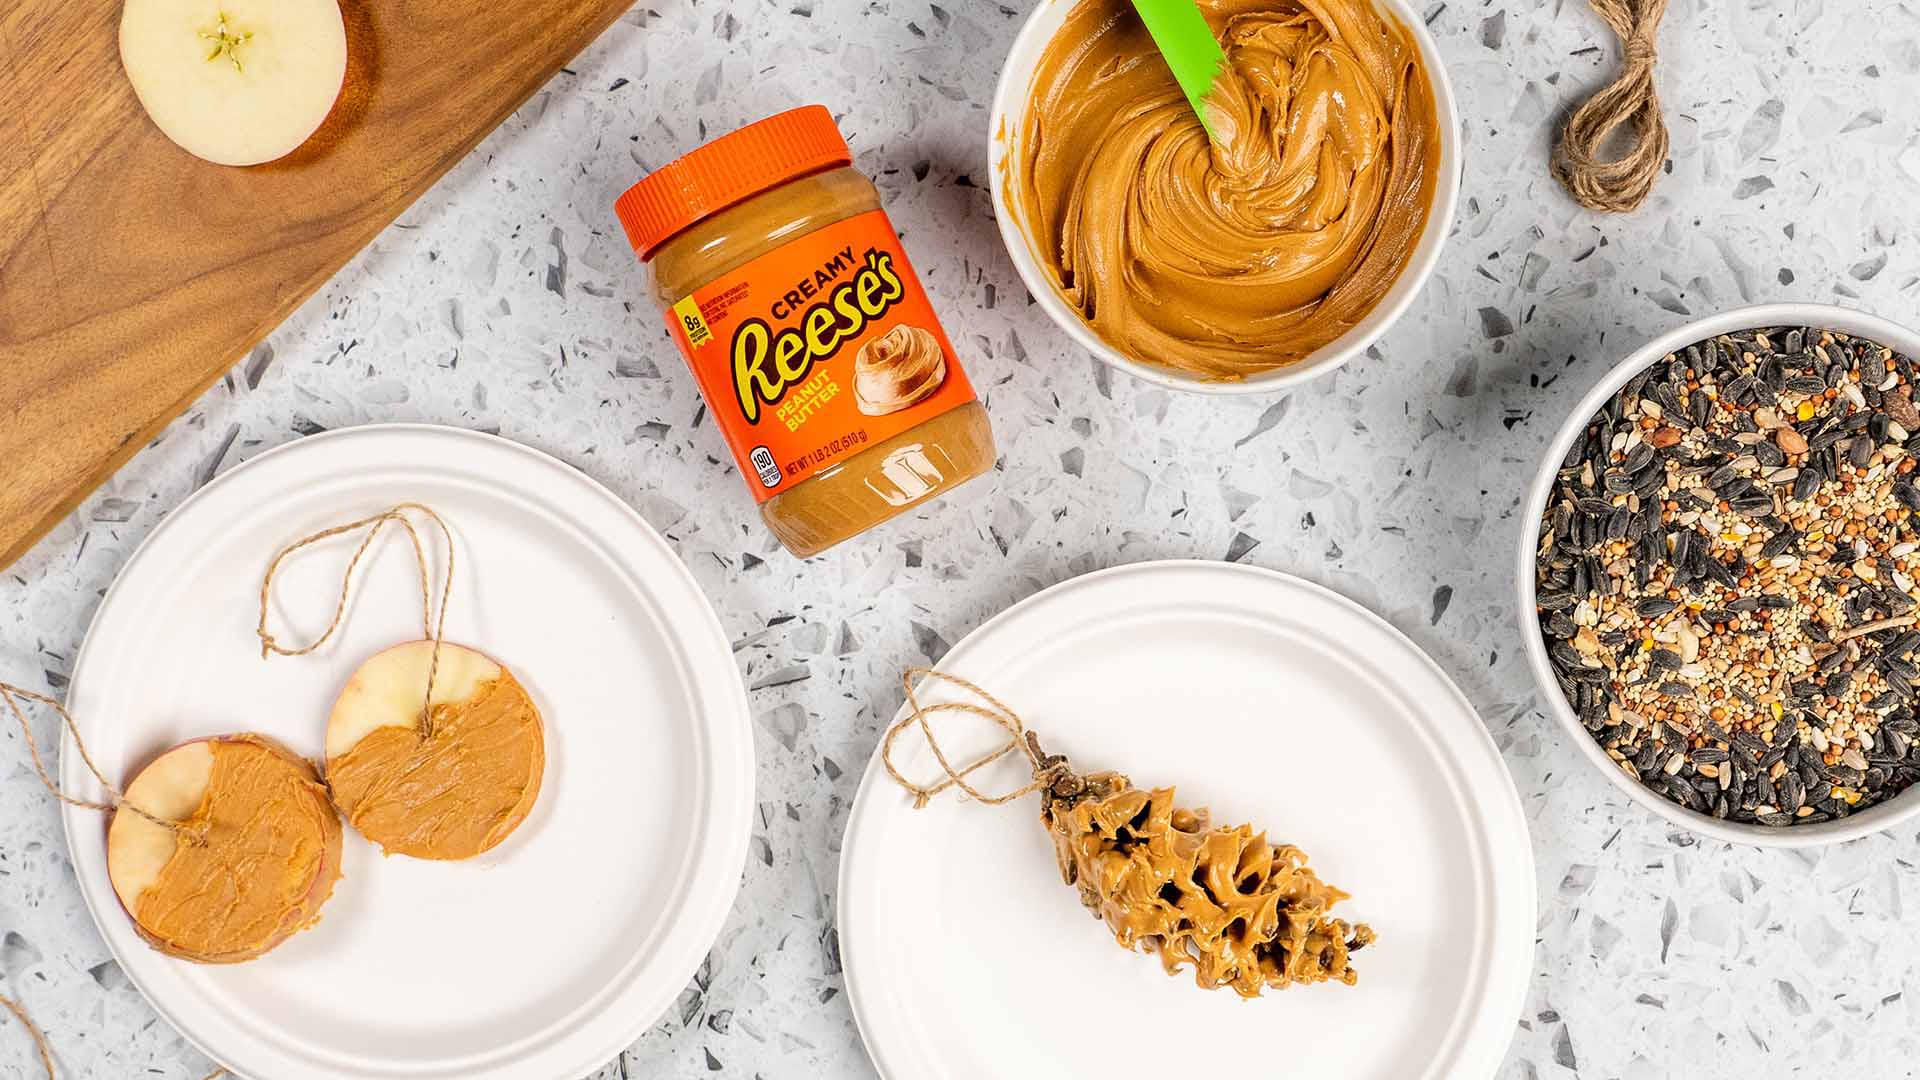 coating the pinecone and apple in reeses peanut butter by rolling